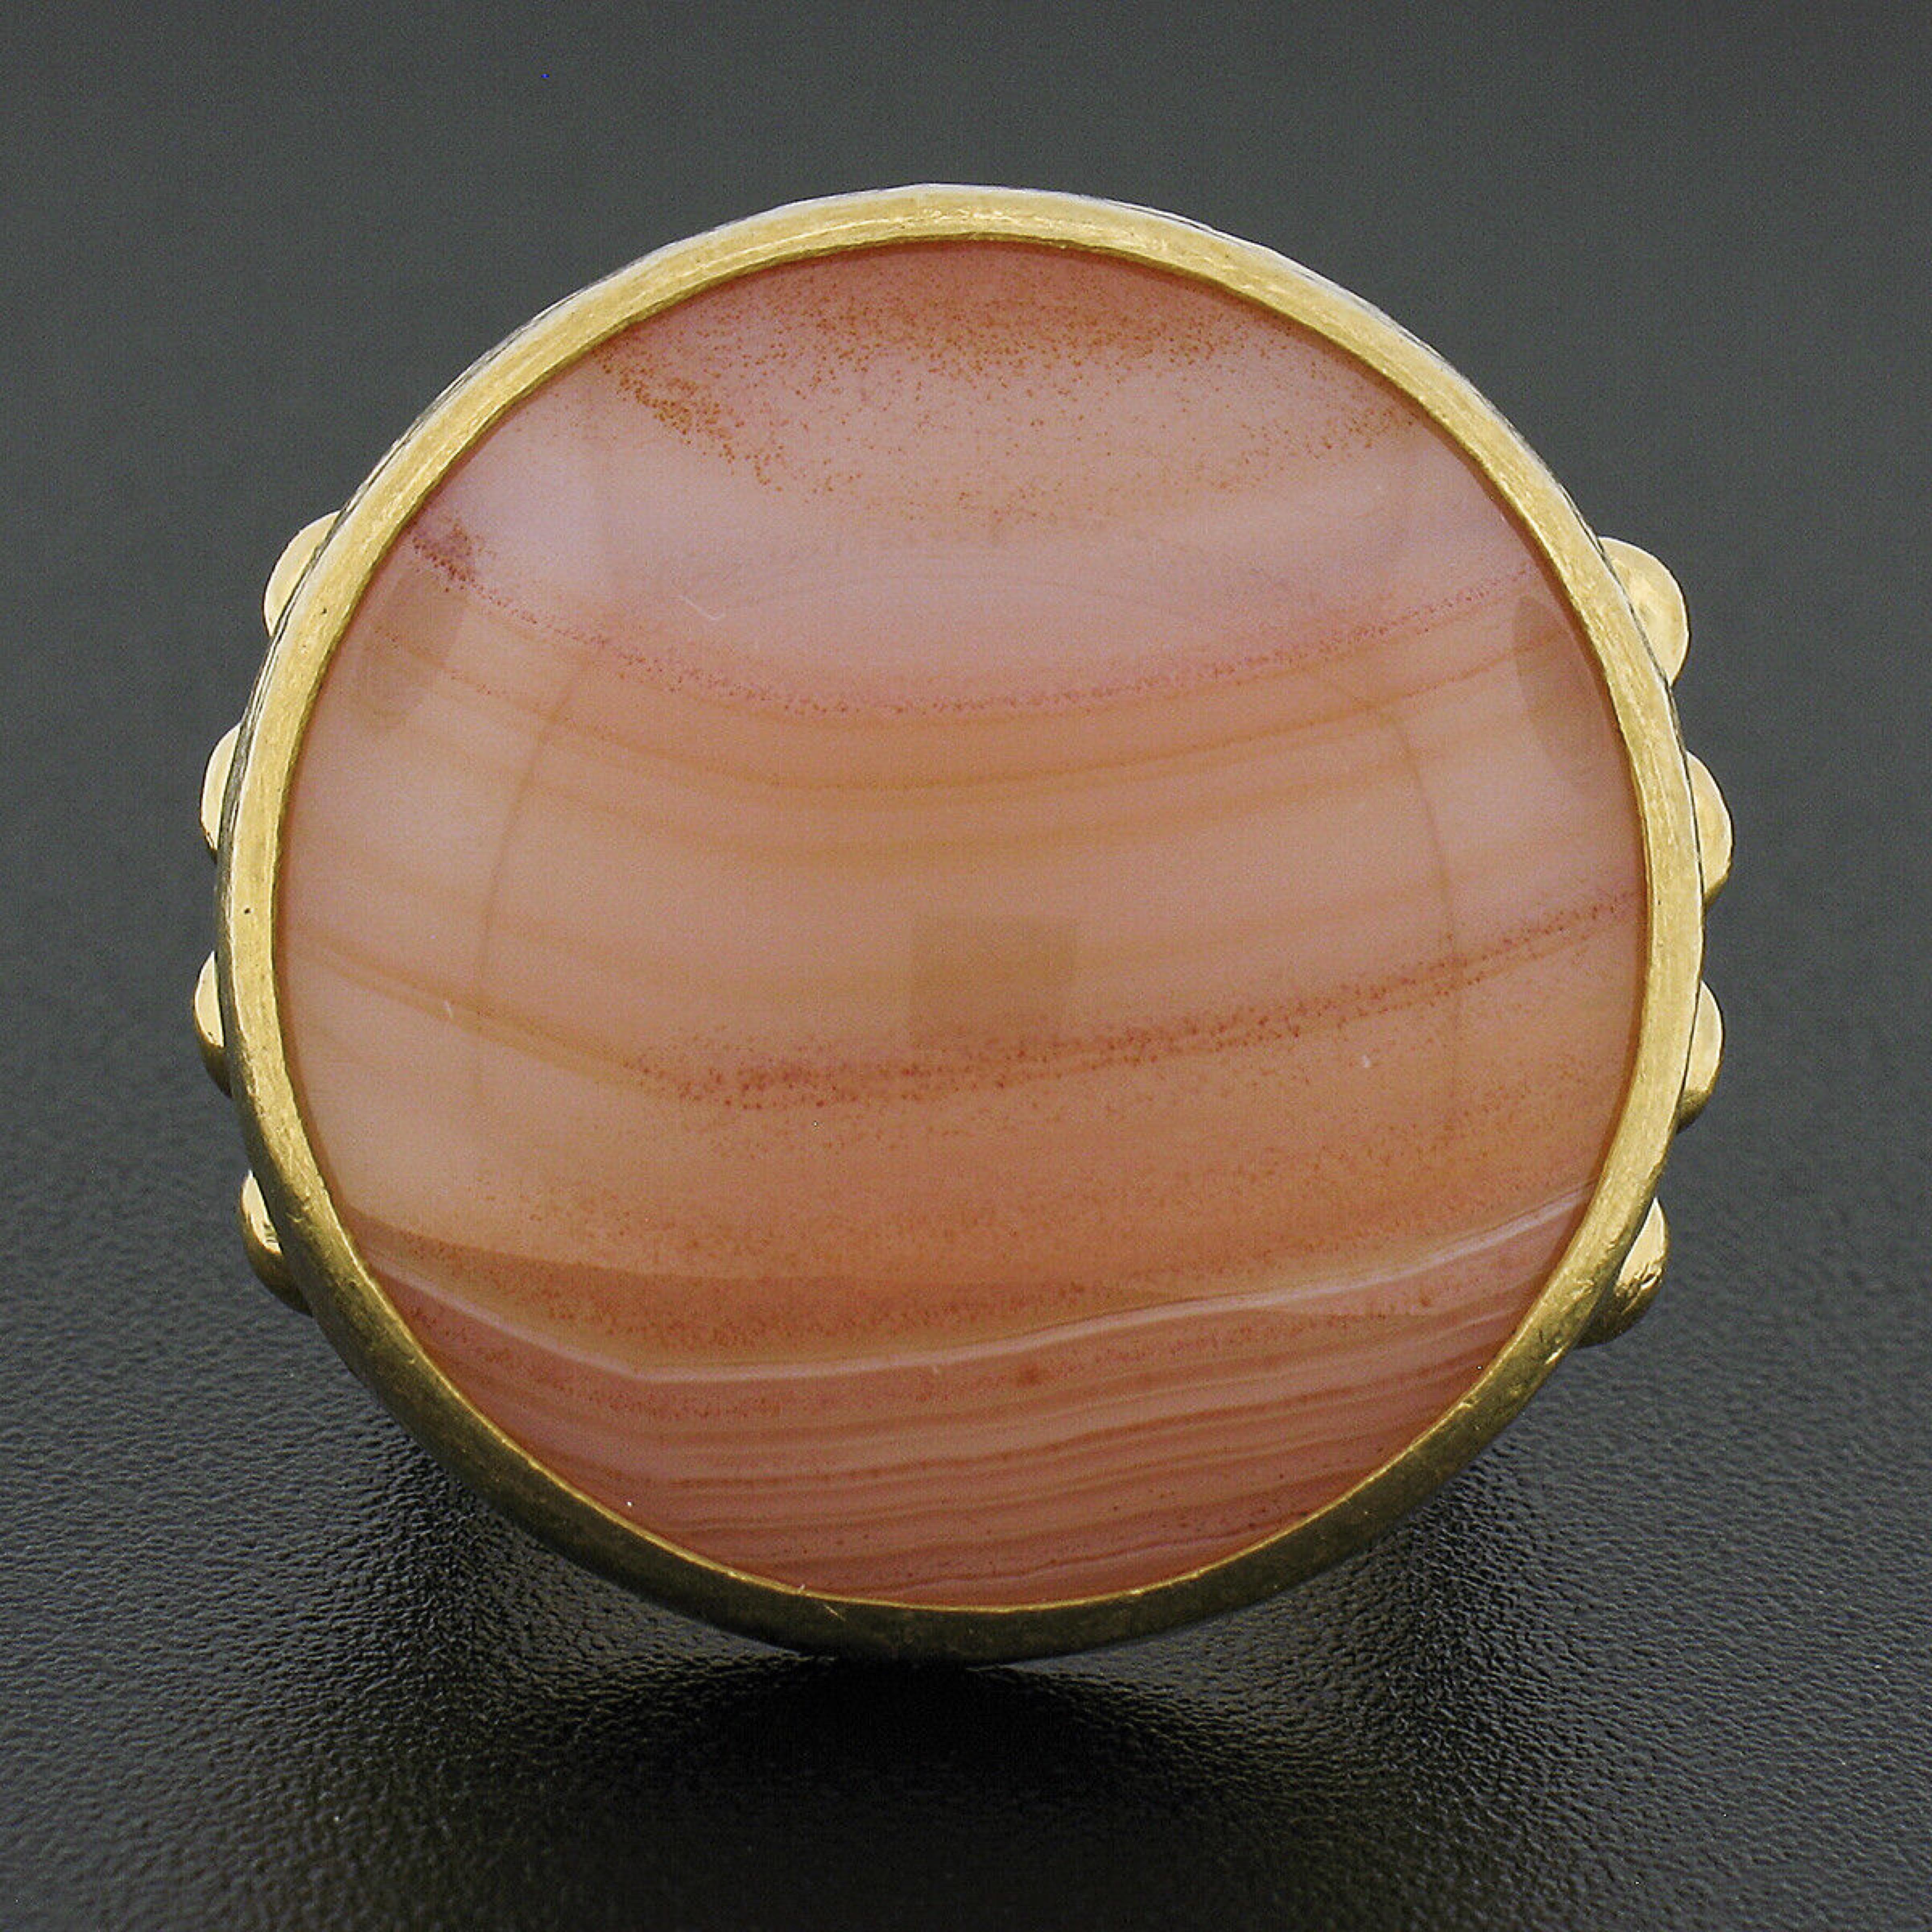 Here we have a magnificent, truly bold, and very well made Gurhan ring that was crafted in solid 24k yellow gold featuring a large round cabochon cut agate neatly bezel set at the center. The solitaire measures approximately 23.3mm in diameter and